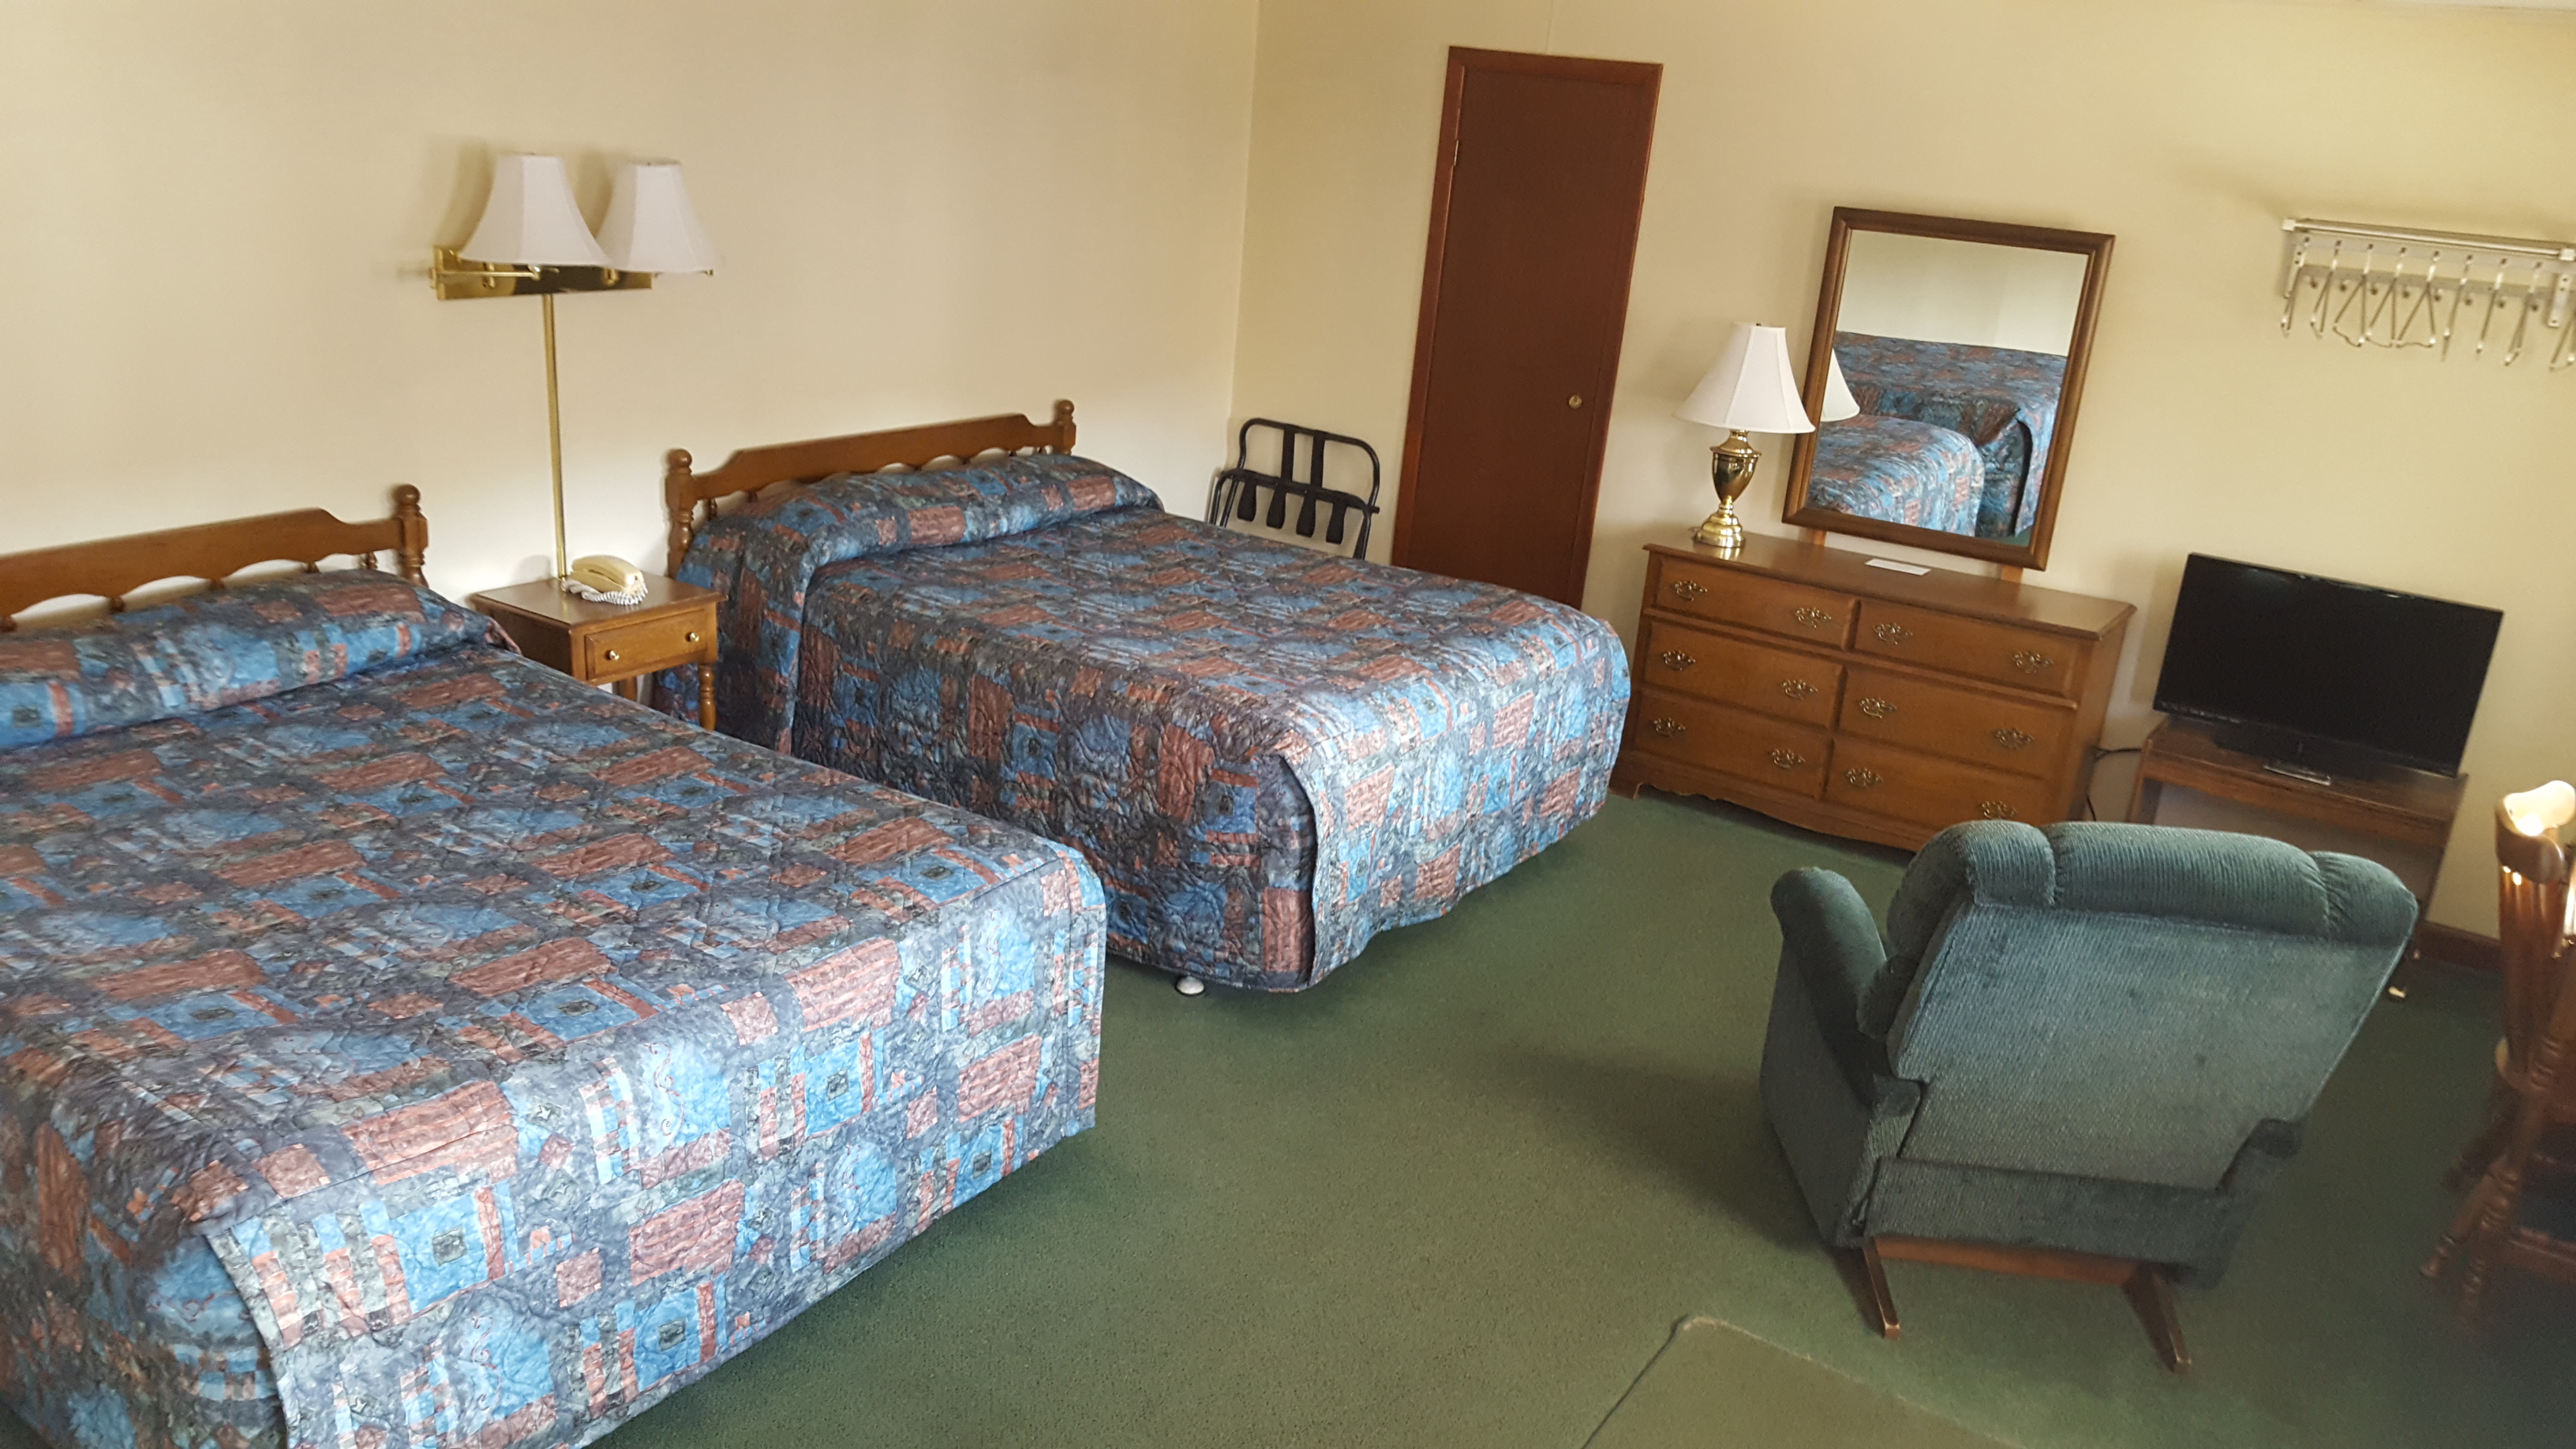 Motel room with two beds and recliner.